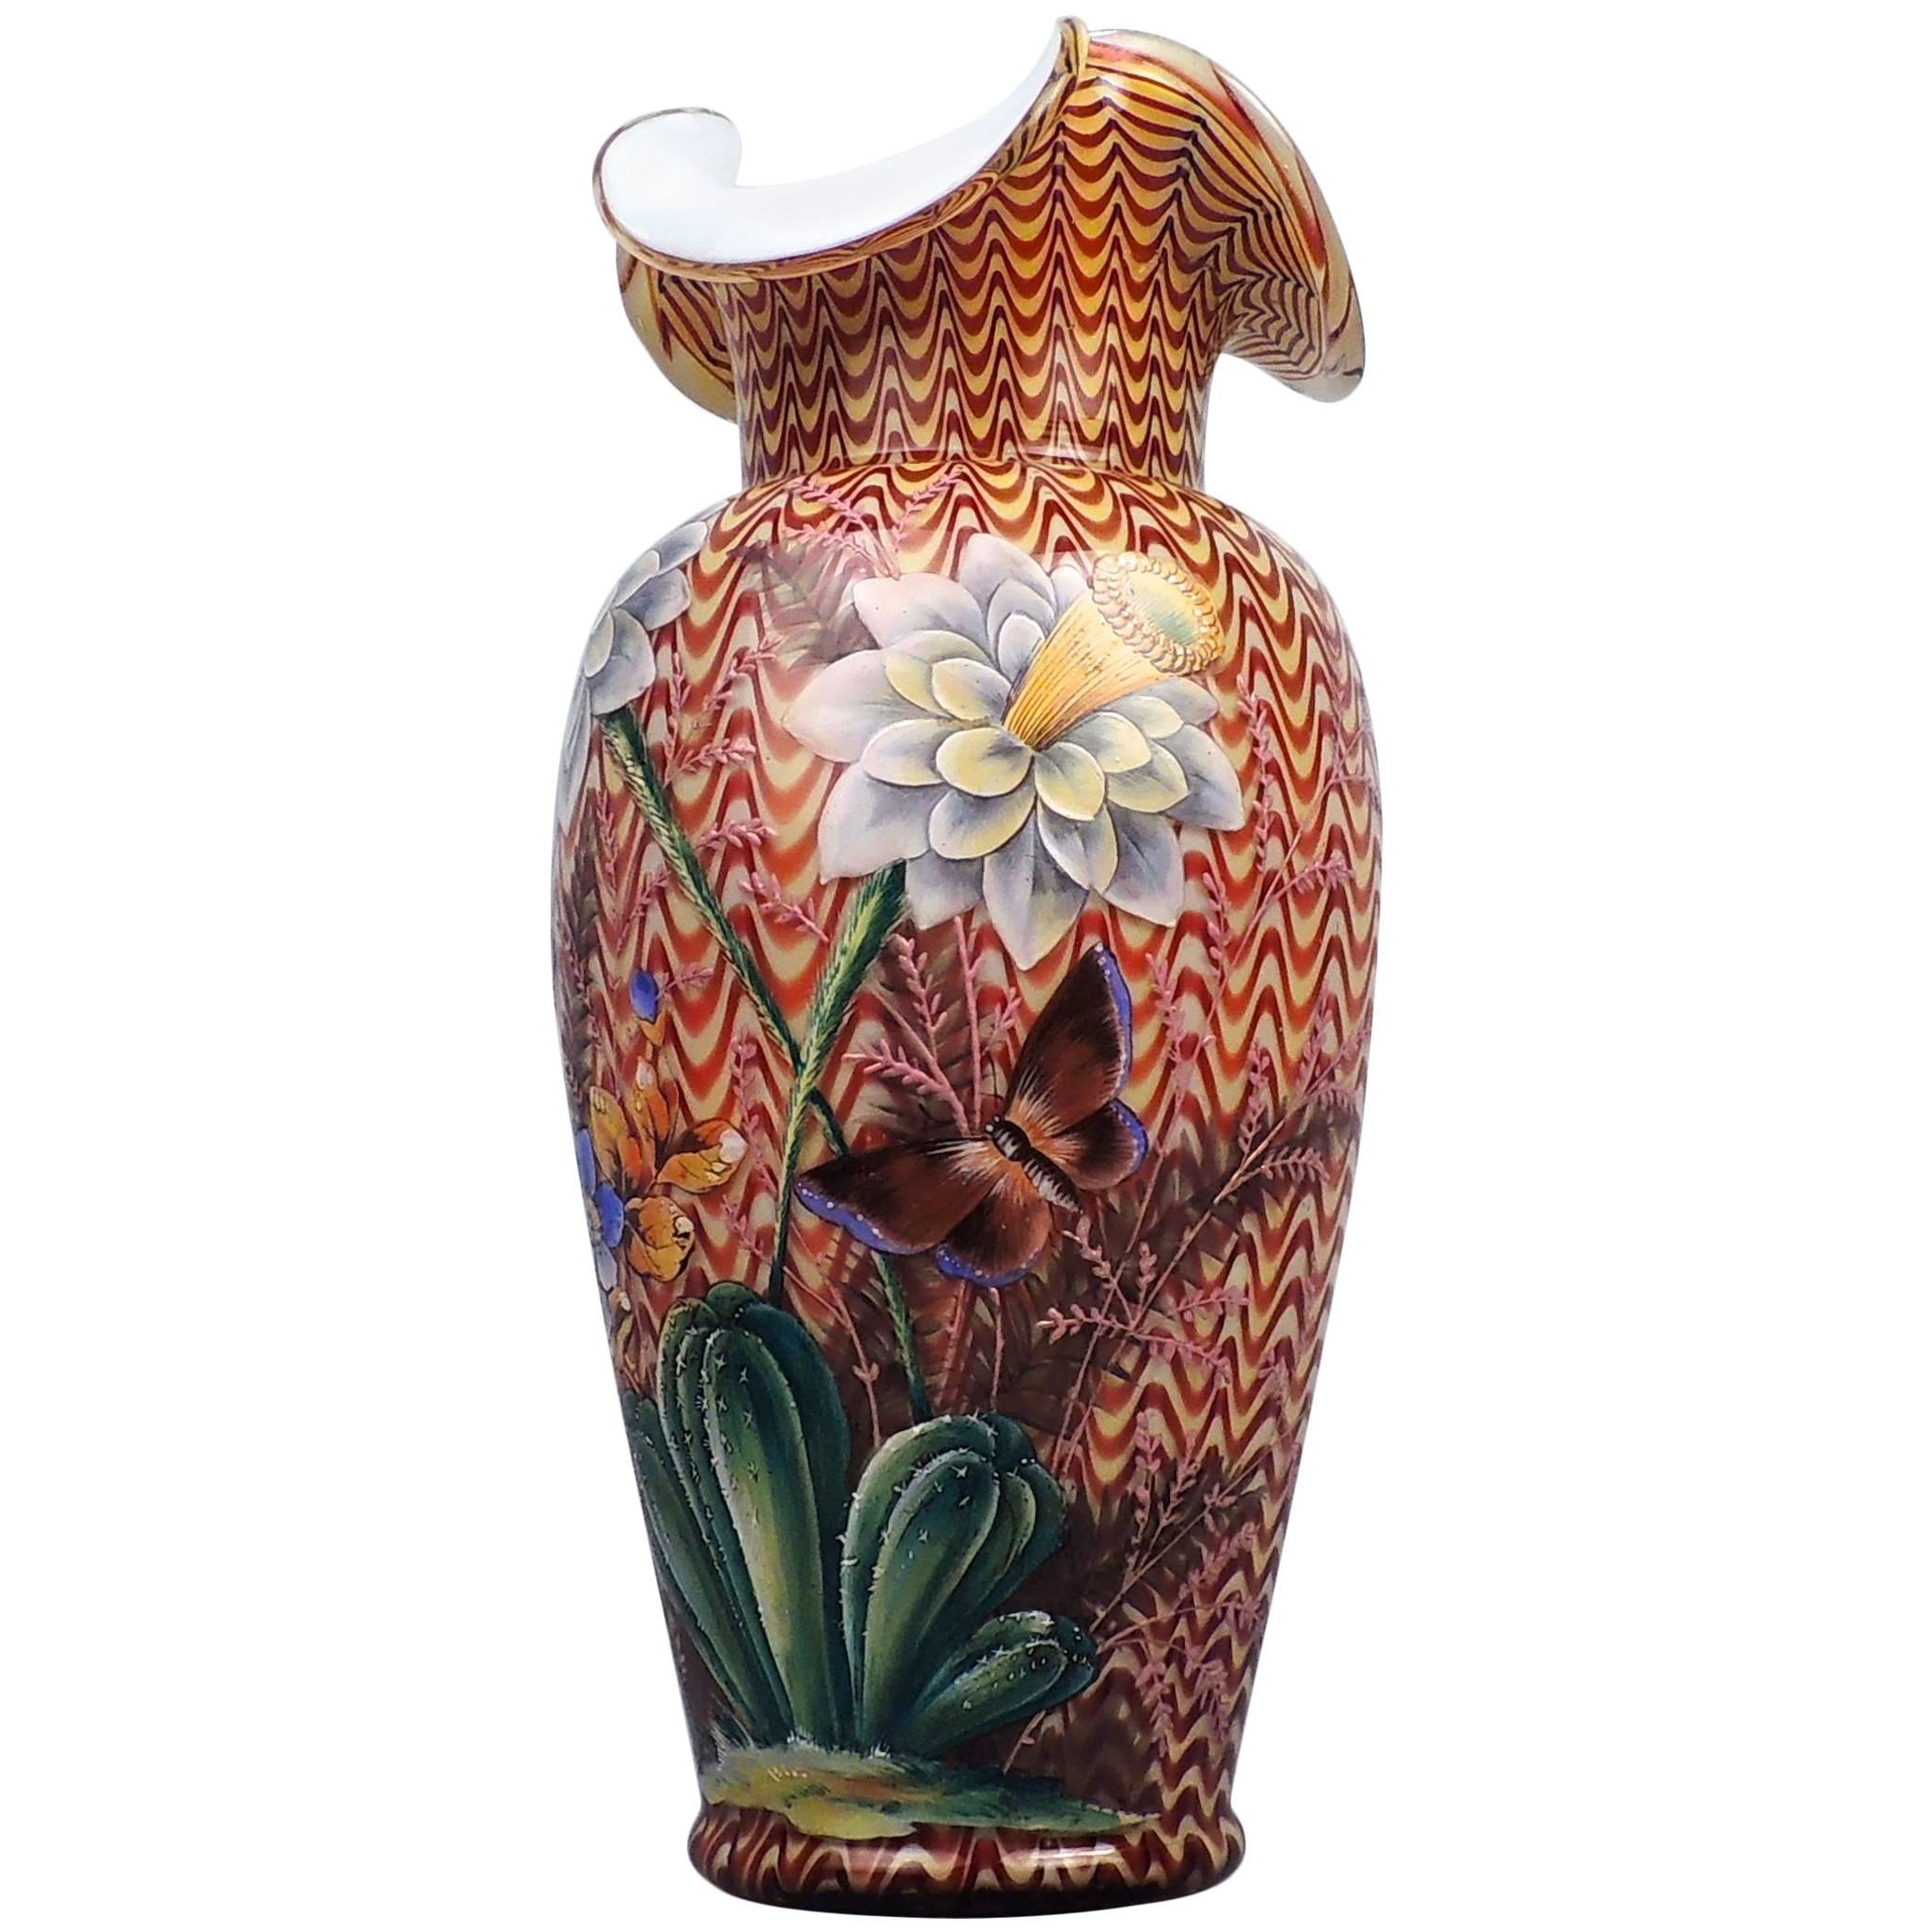 English Victorian Art Glass Vase with Enameled Flowers by Stevens & Williams